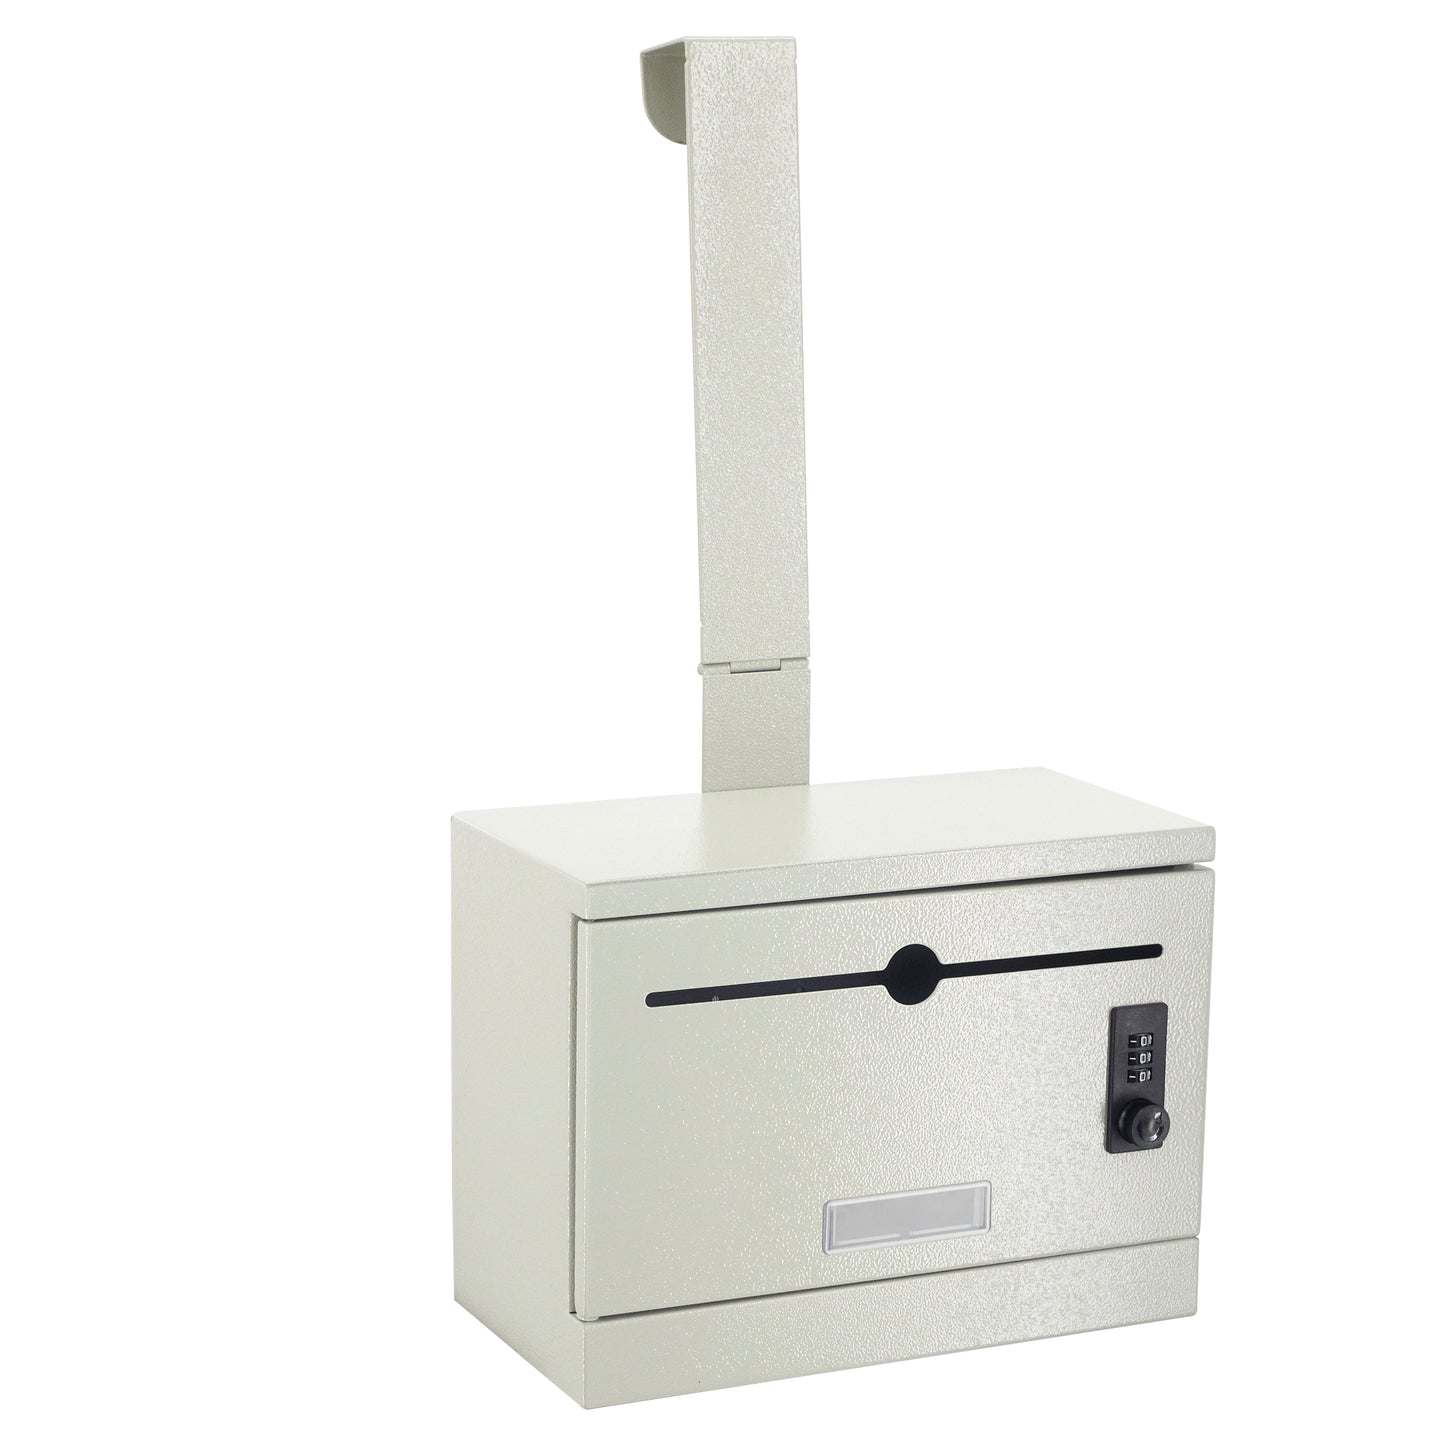 M-D22-G - Over-the-Door Heavy Duty Steel Drop Box,Specimen Containers,Payment Drop box, Key Drop Off Box, Night Drop Box,Height Adjustable Range of 6.5'', Removable Hinge for Optional Wall Mount